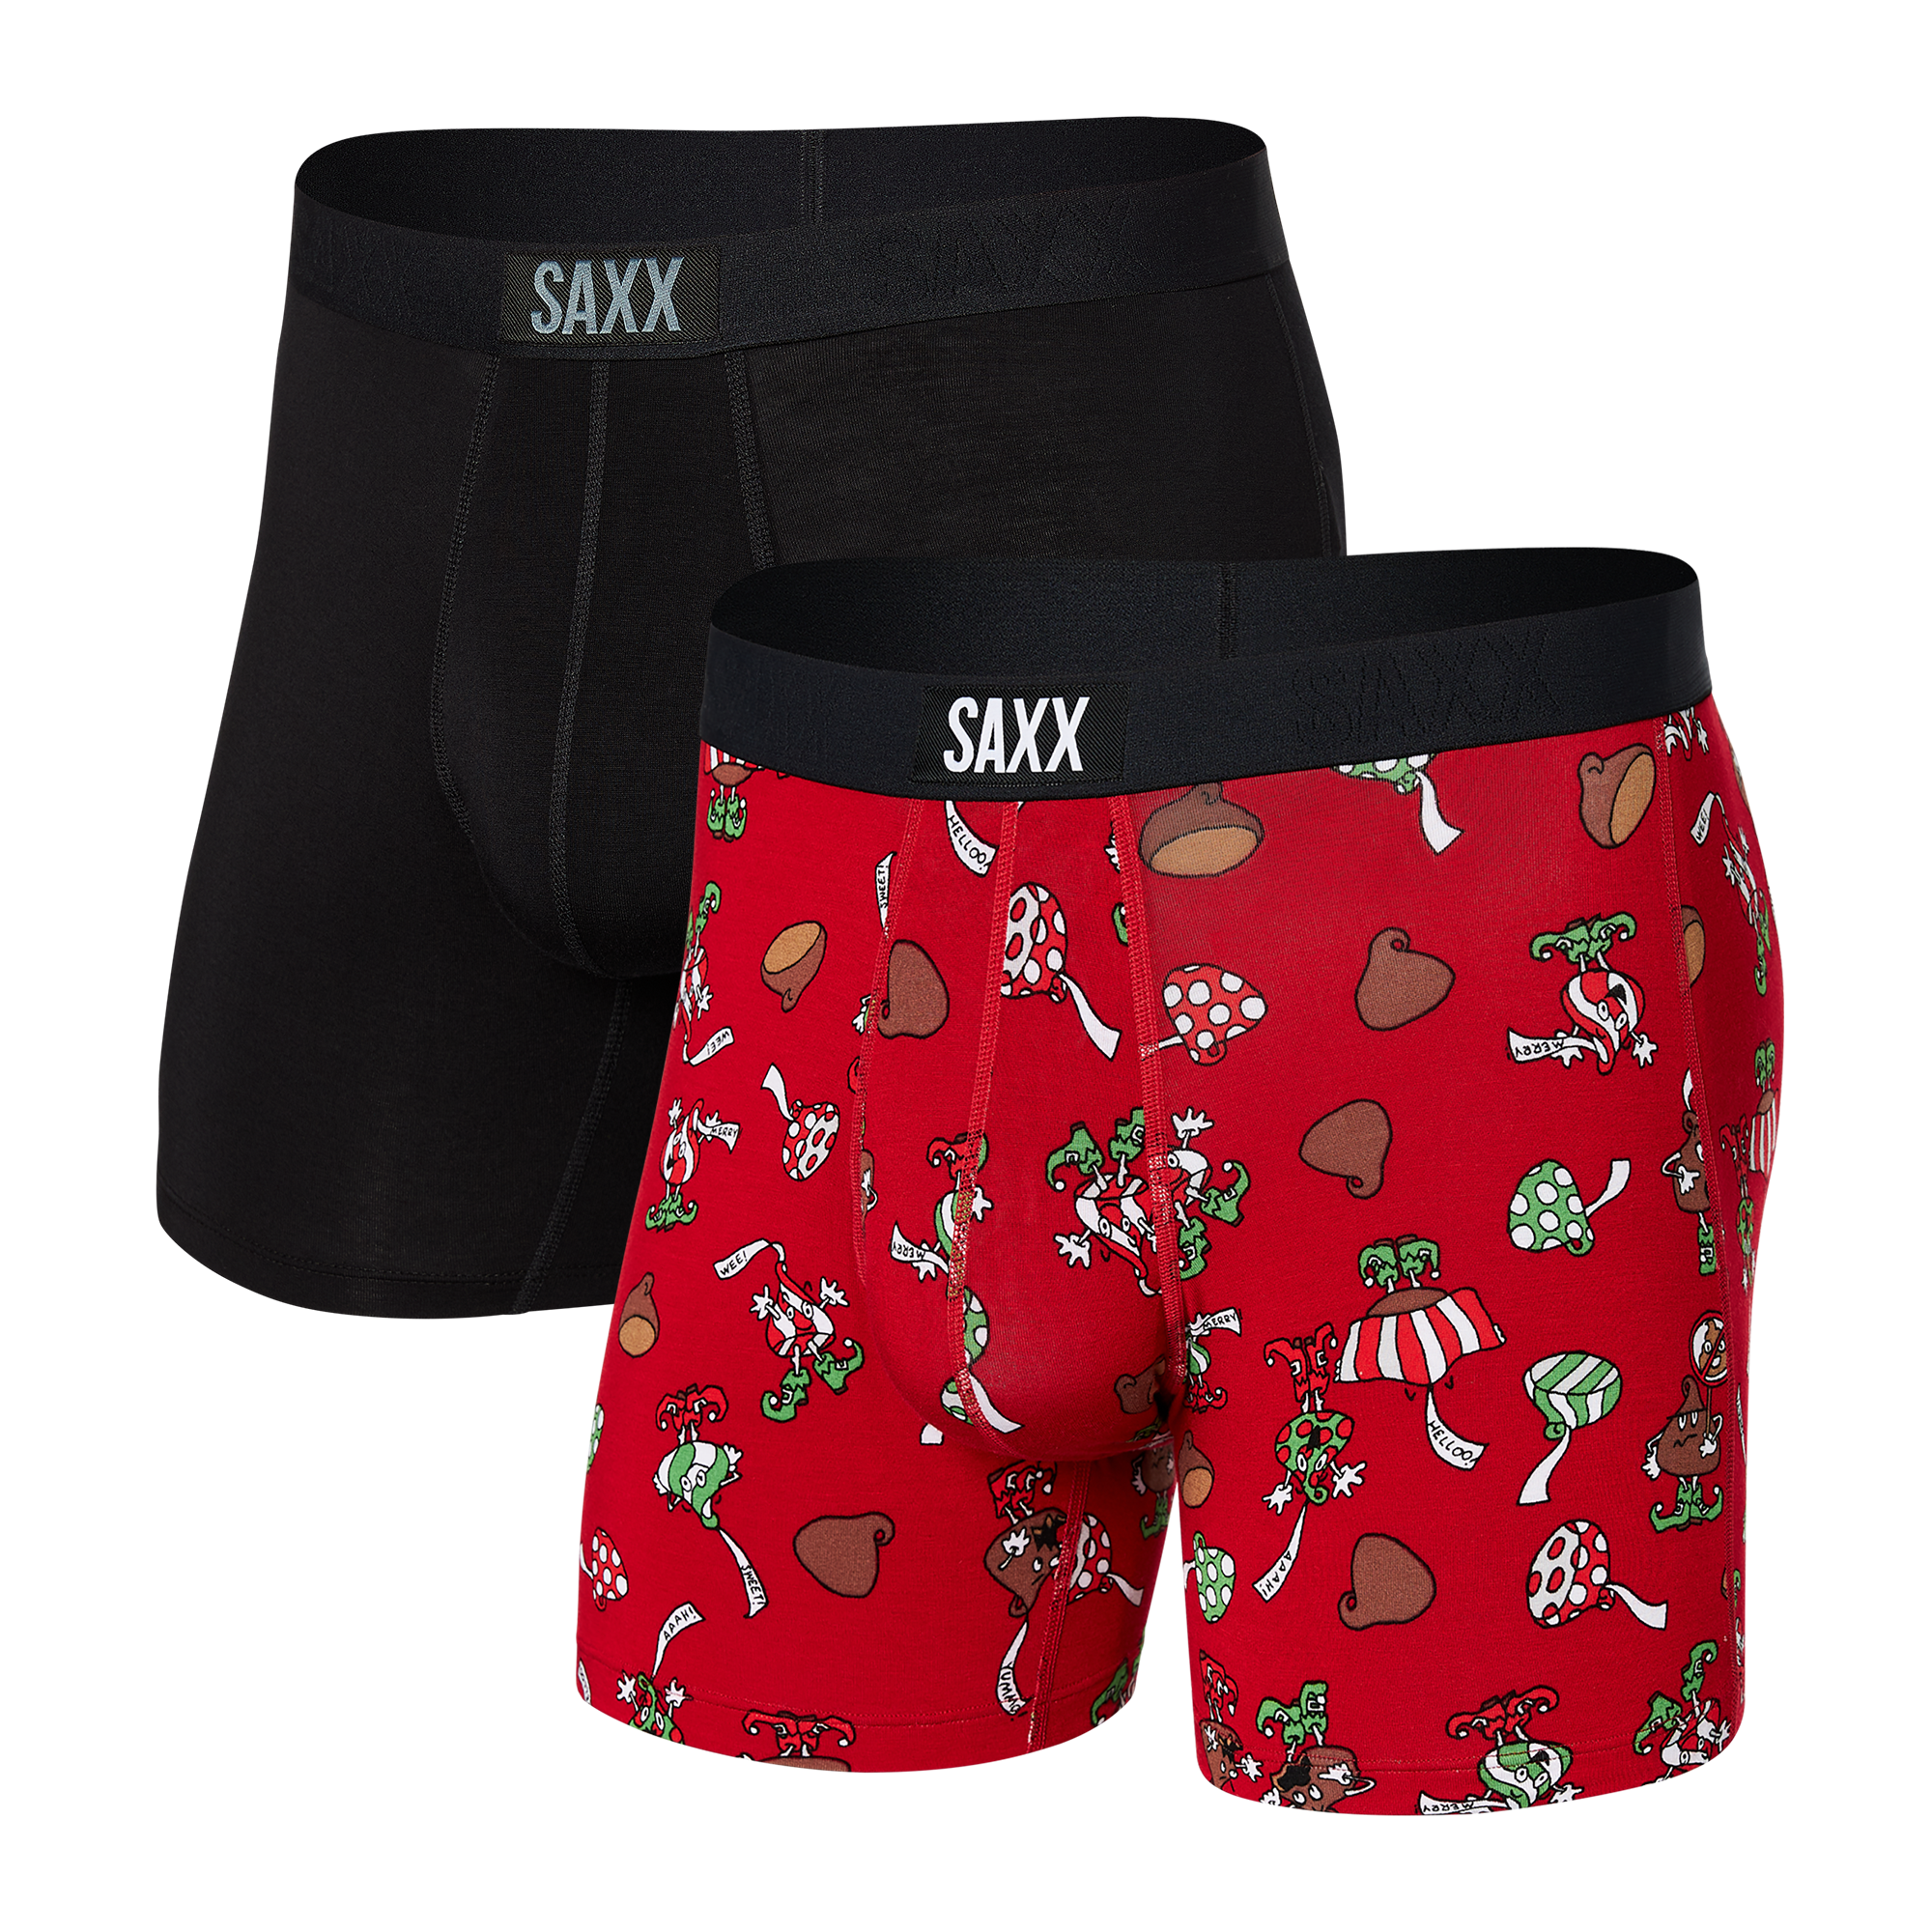 Boxer Brief Assorted Colors (Youth) - 3 Pack – GRANA